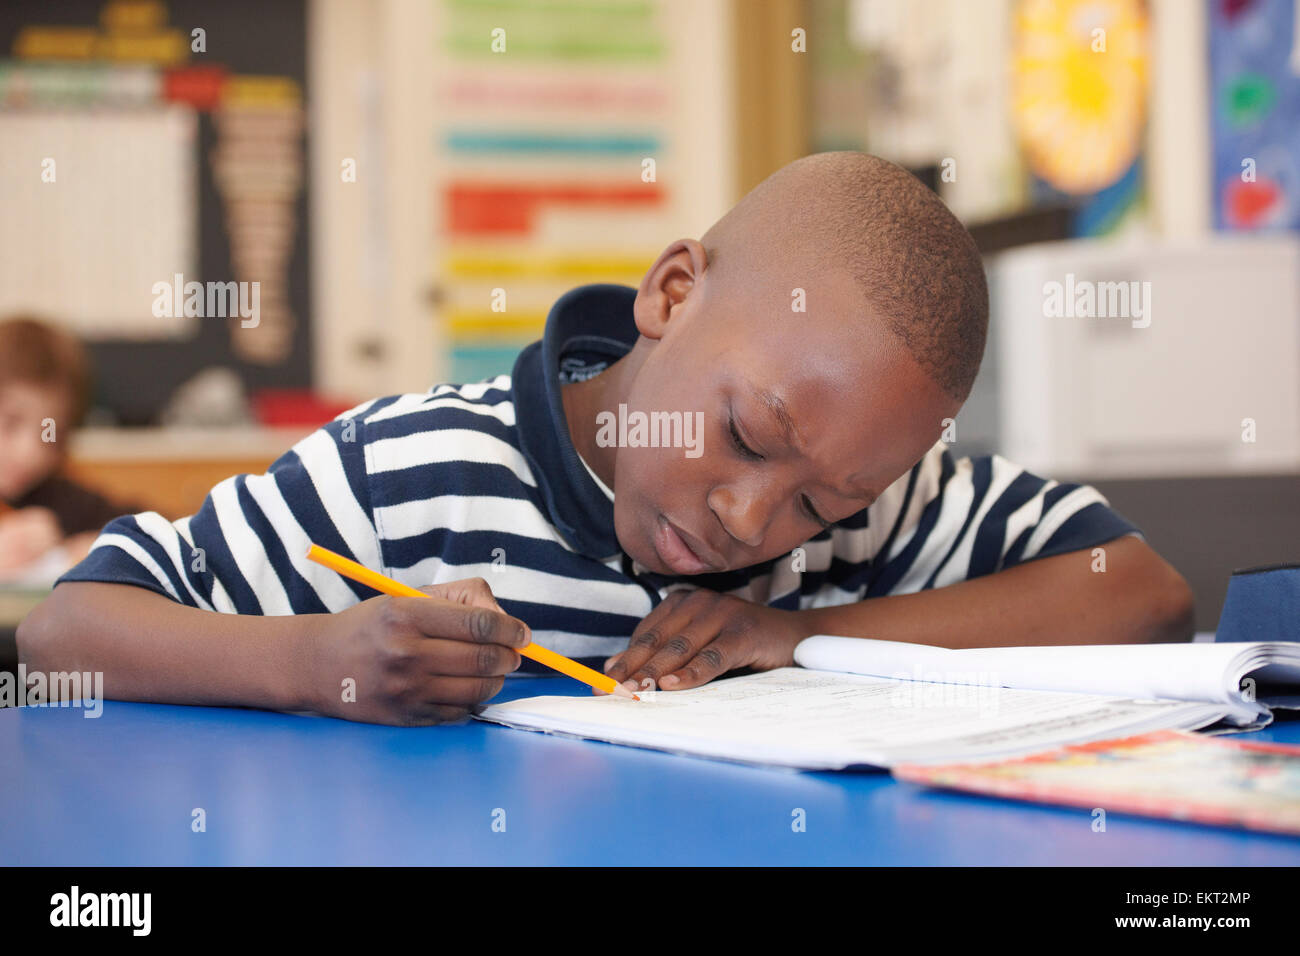 Young Boy In Grade 3 Working At His Desk In Classroom, Toronto, Ontario, Canada Stock Photo